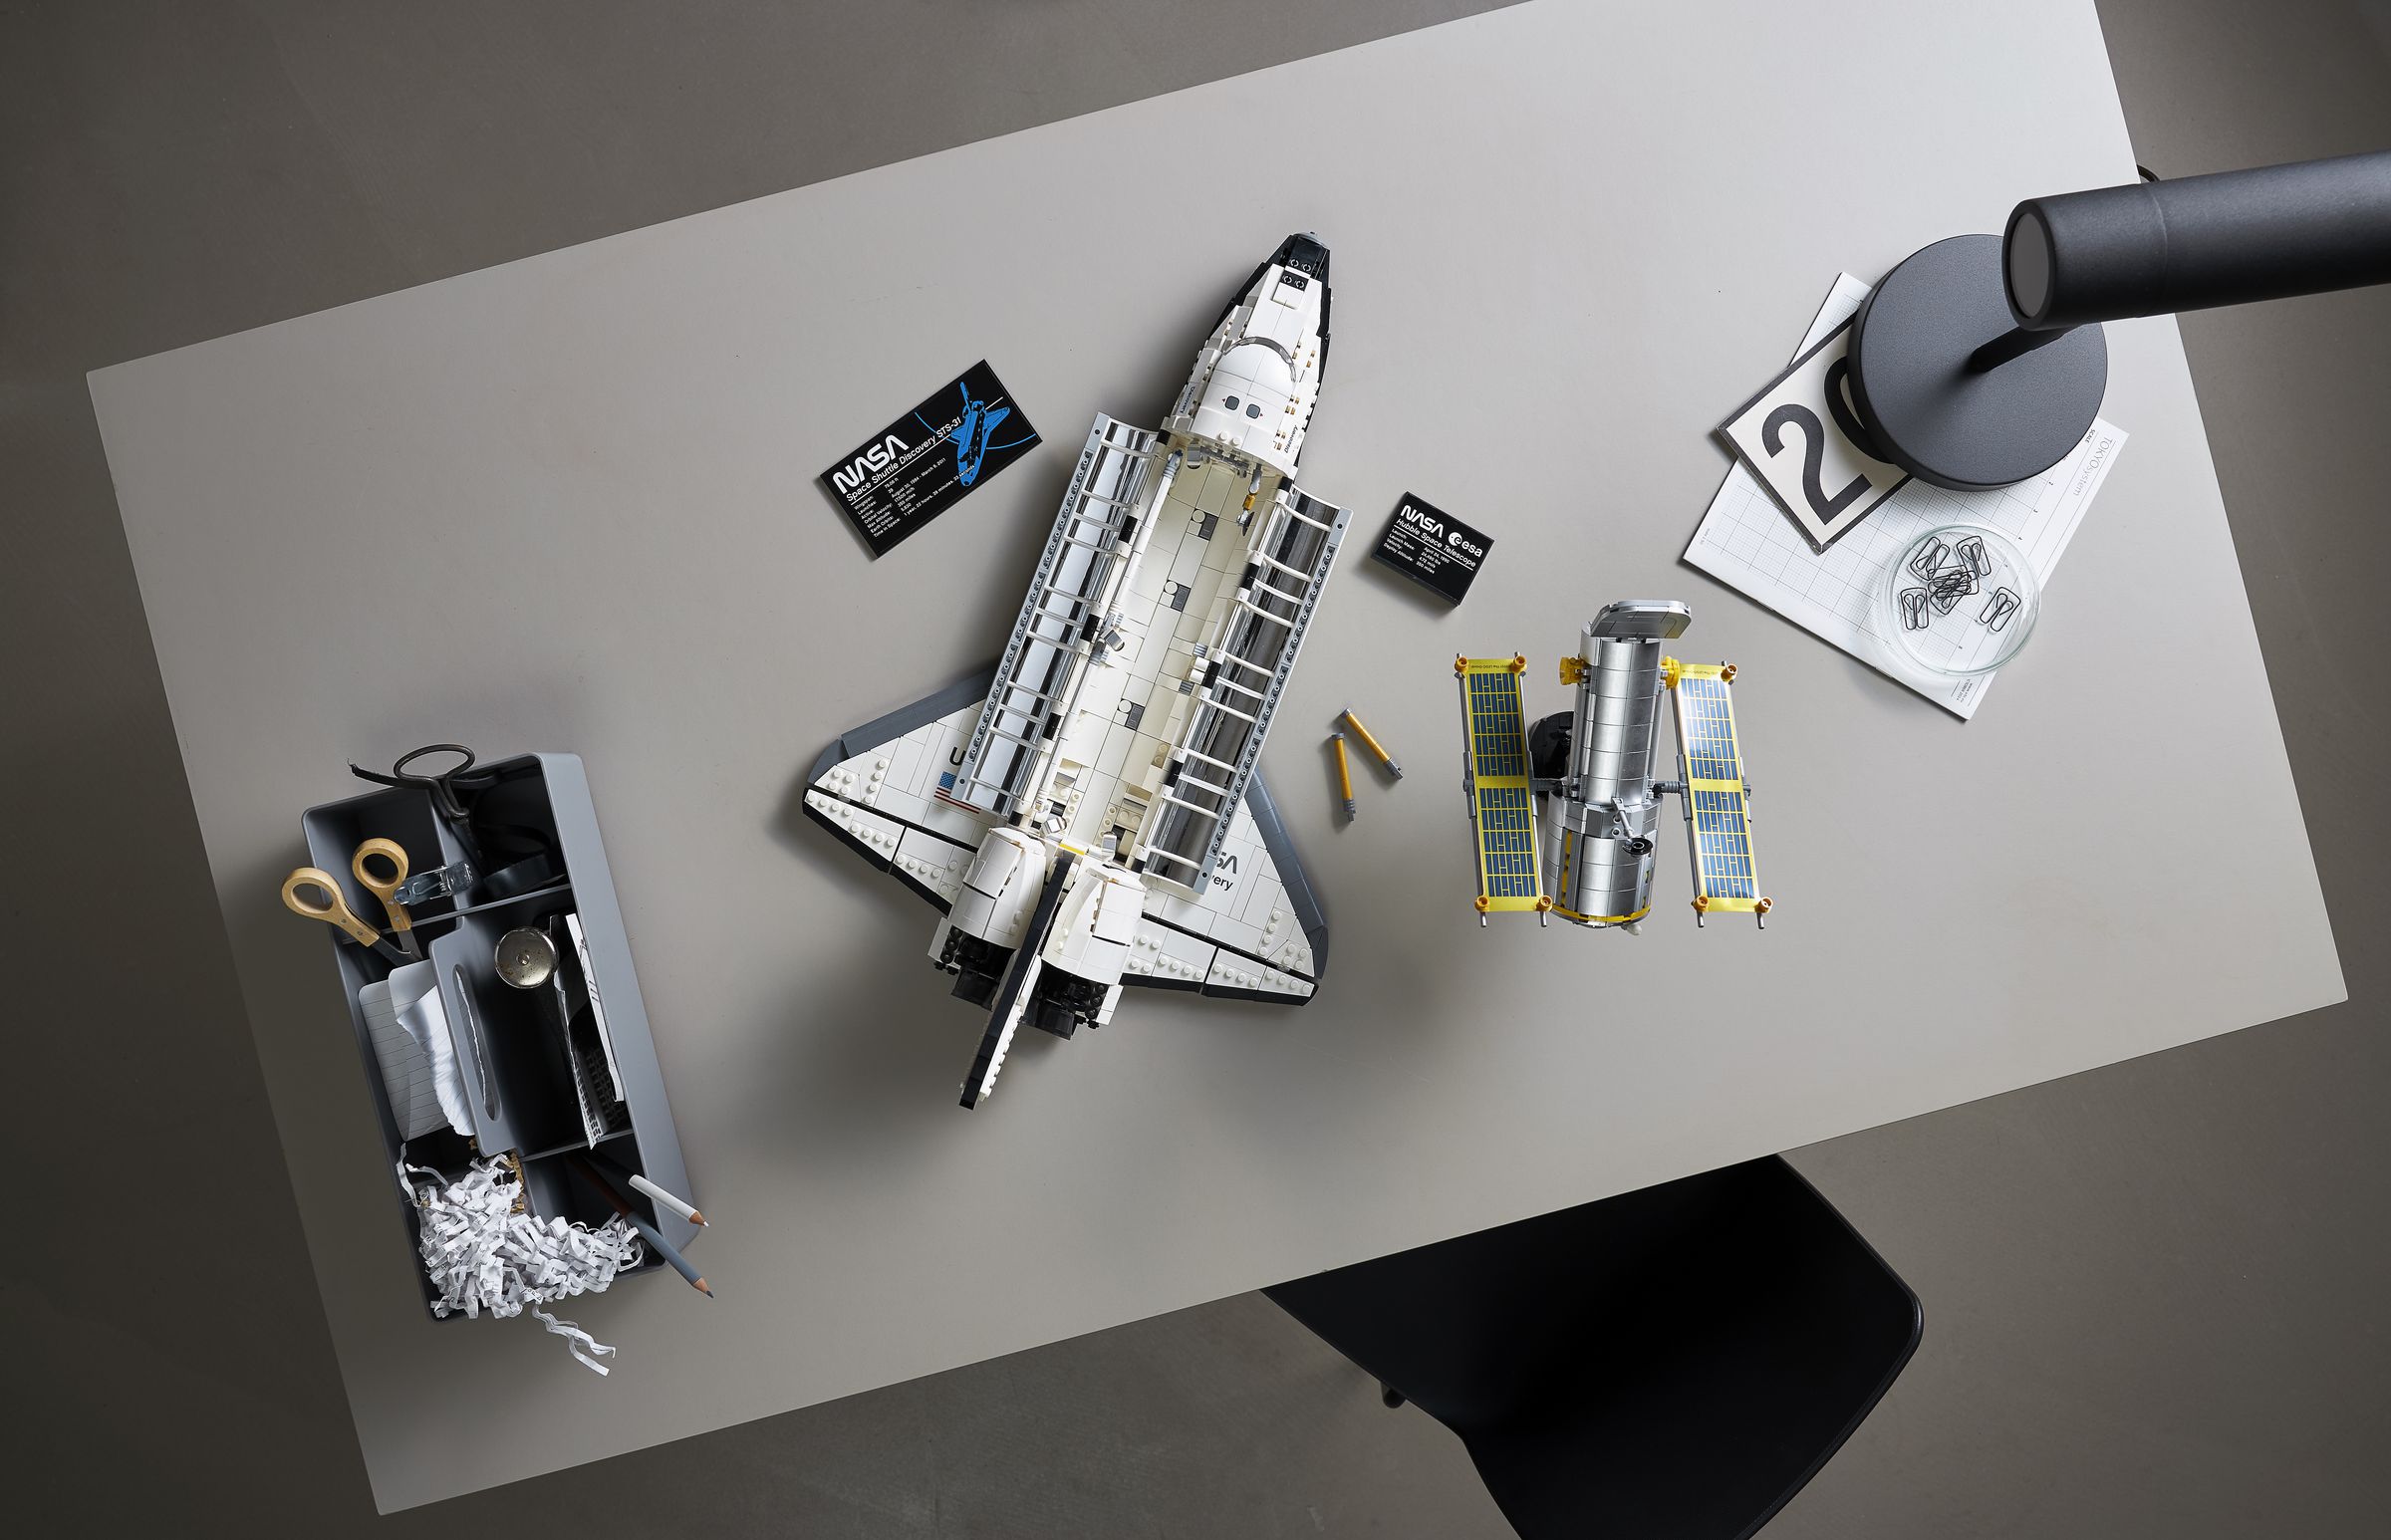 A bird’s eye view of the Lego space shuttle on a table, with it’s payload bay open to show the shiny interior of its doors. The Hubble telescope is next to the shuttle.